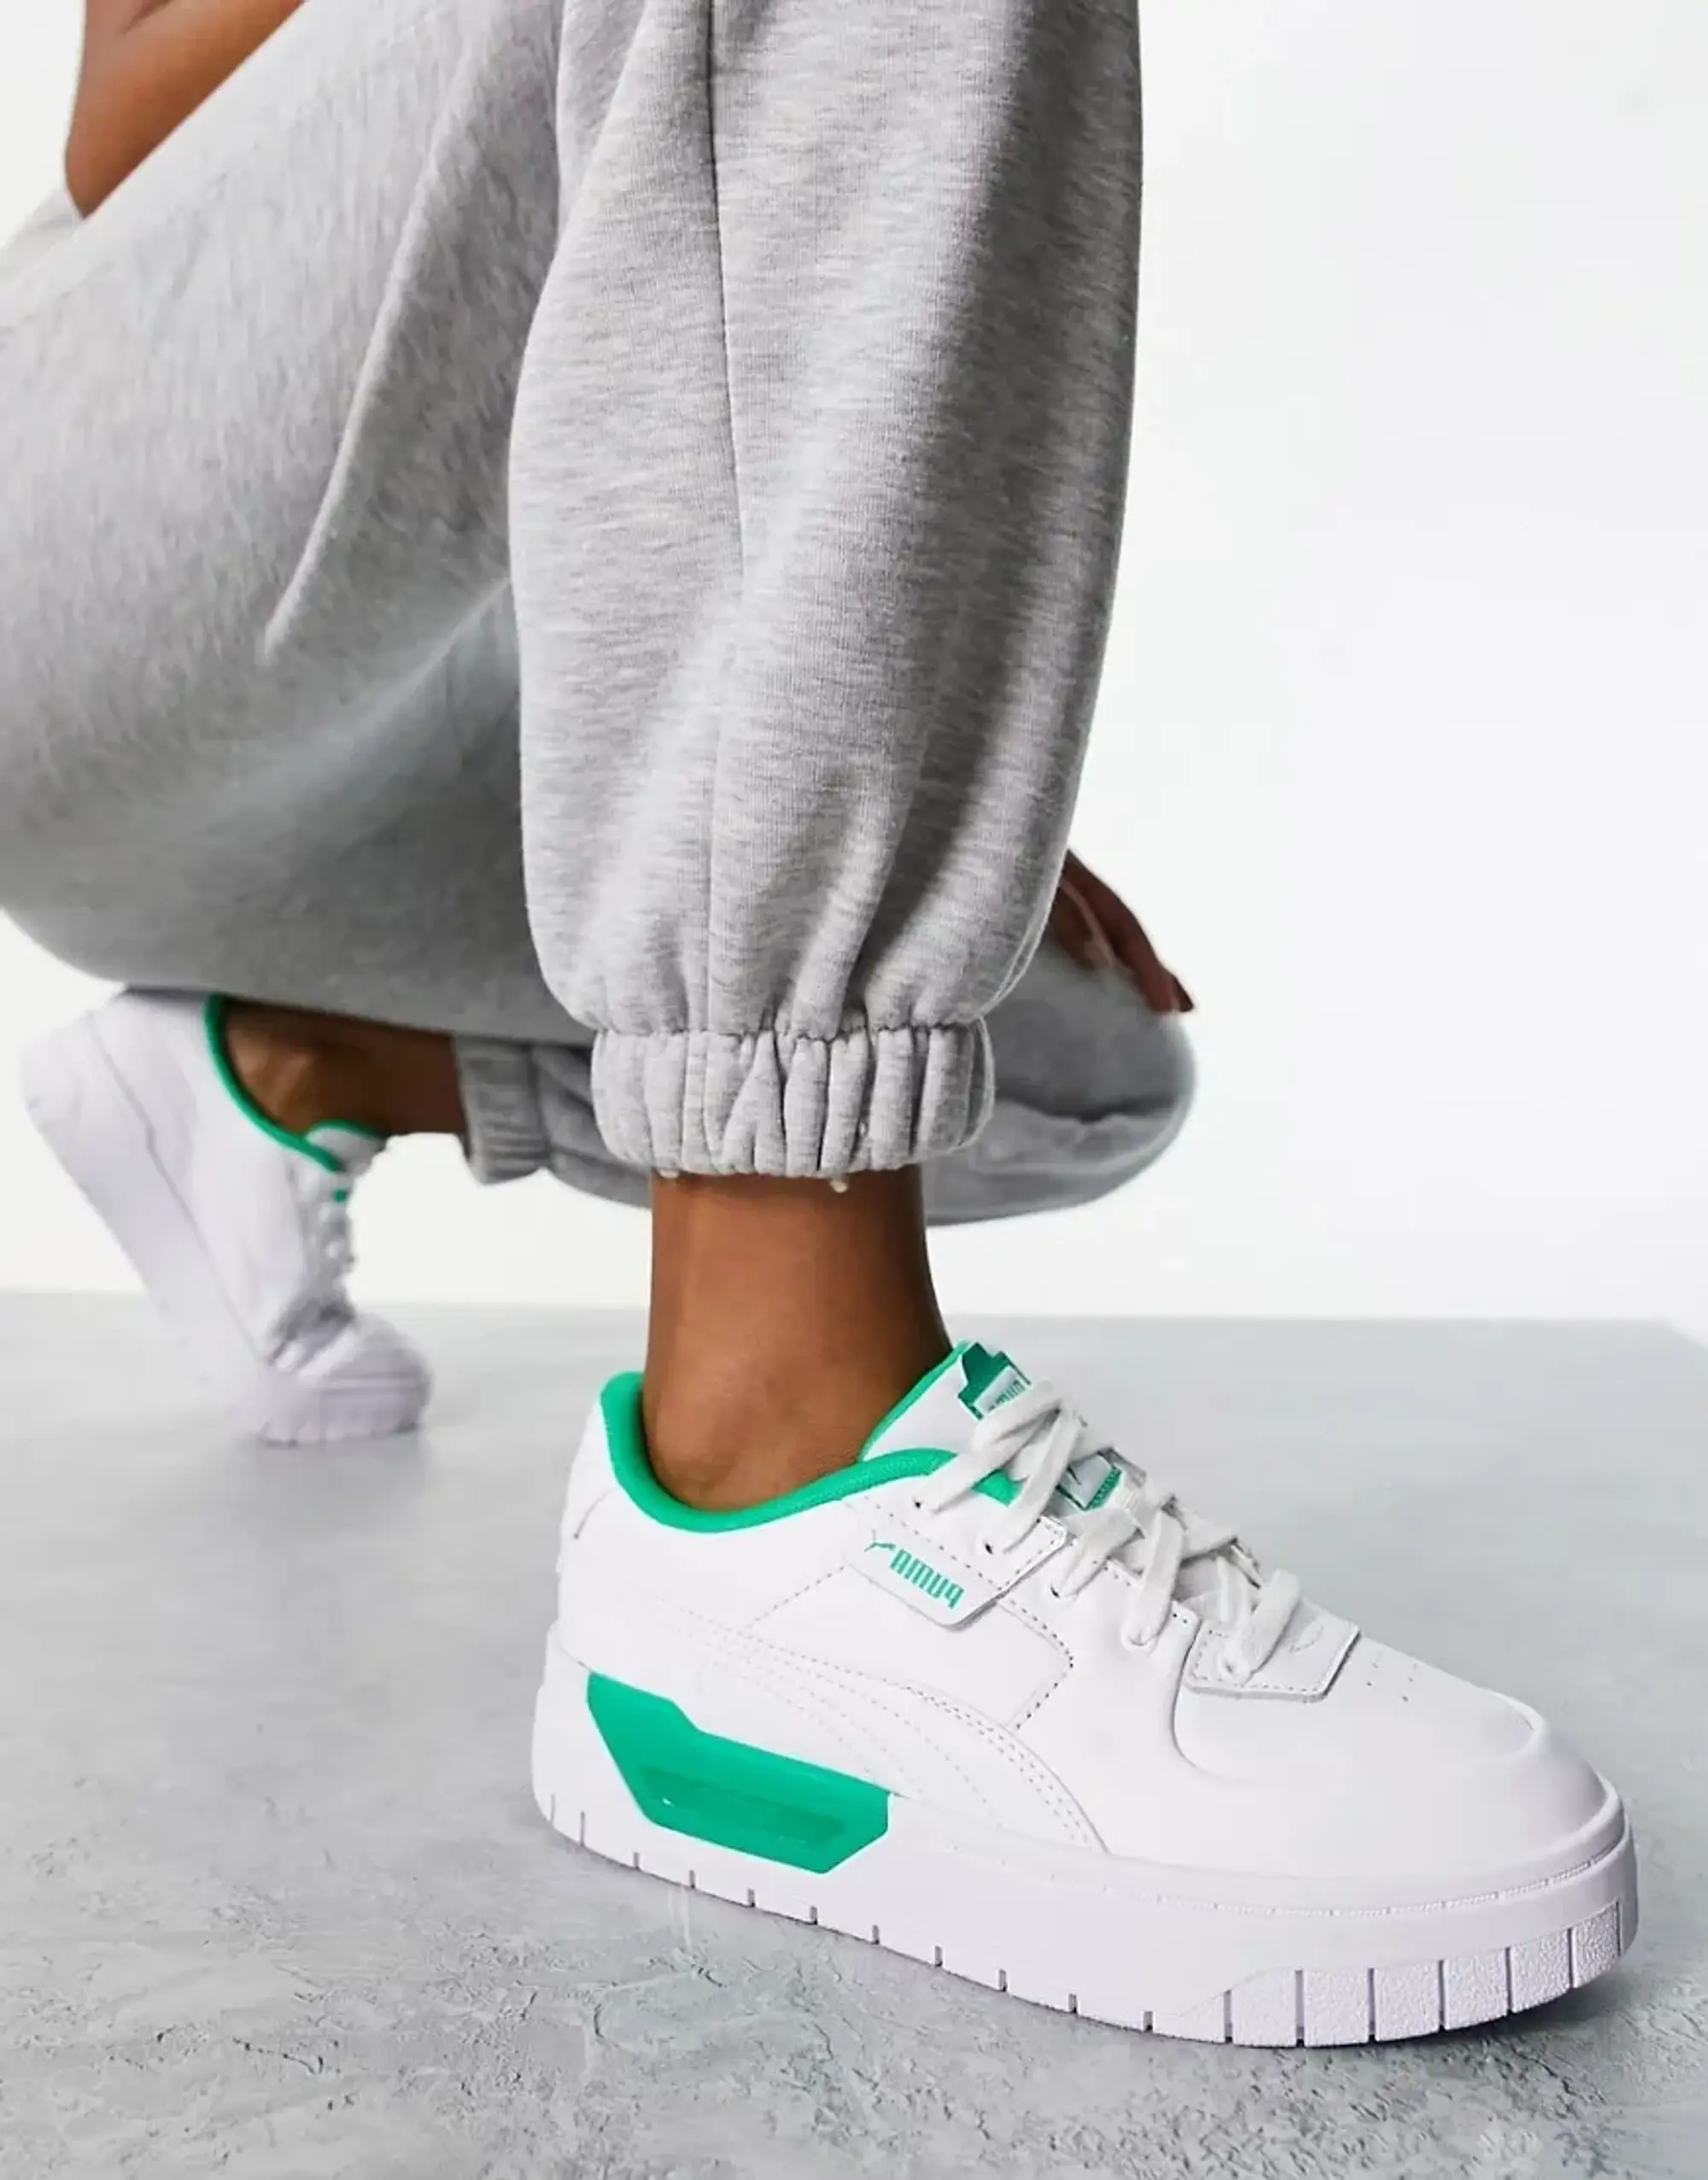 Puma Cali Dream Trainers In White And Acid Green - Exclusive To Asos